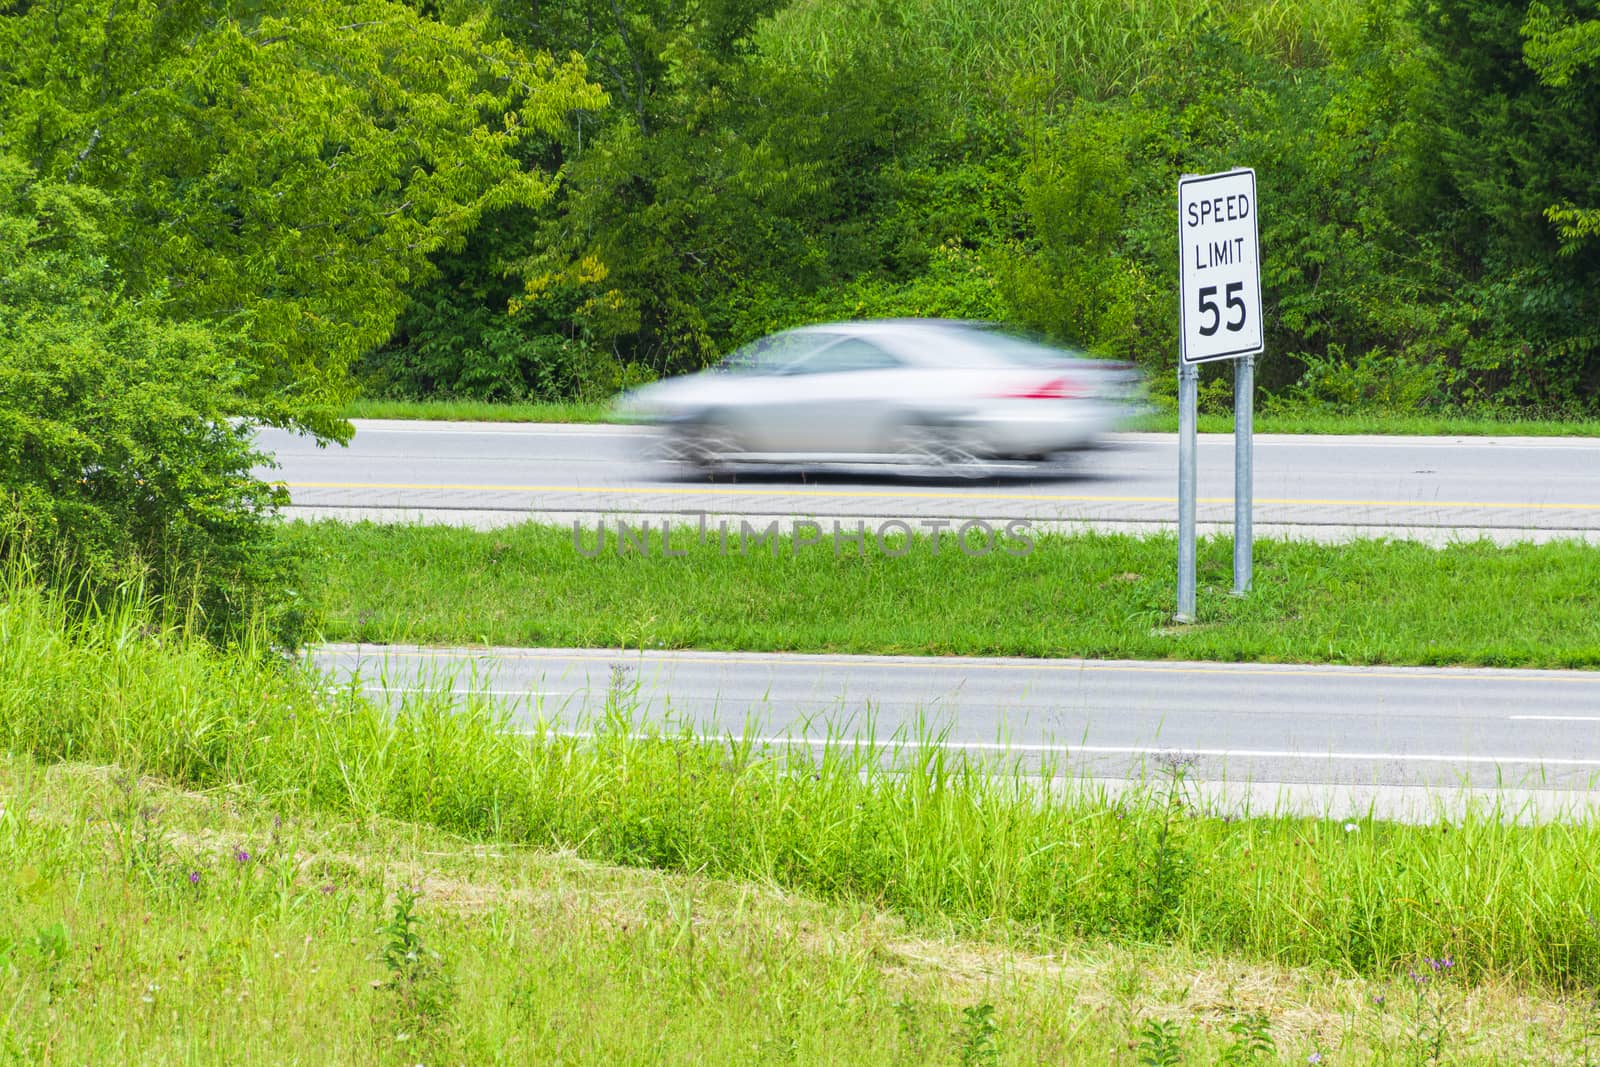 Speeding Car Streaks By Speed Limit Sign by stockbuster1